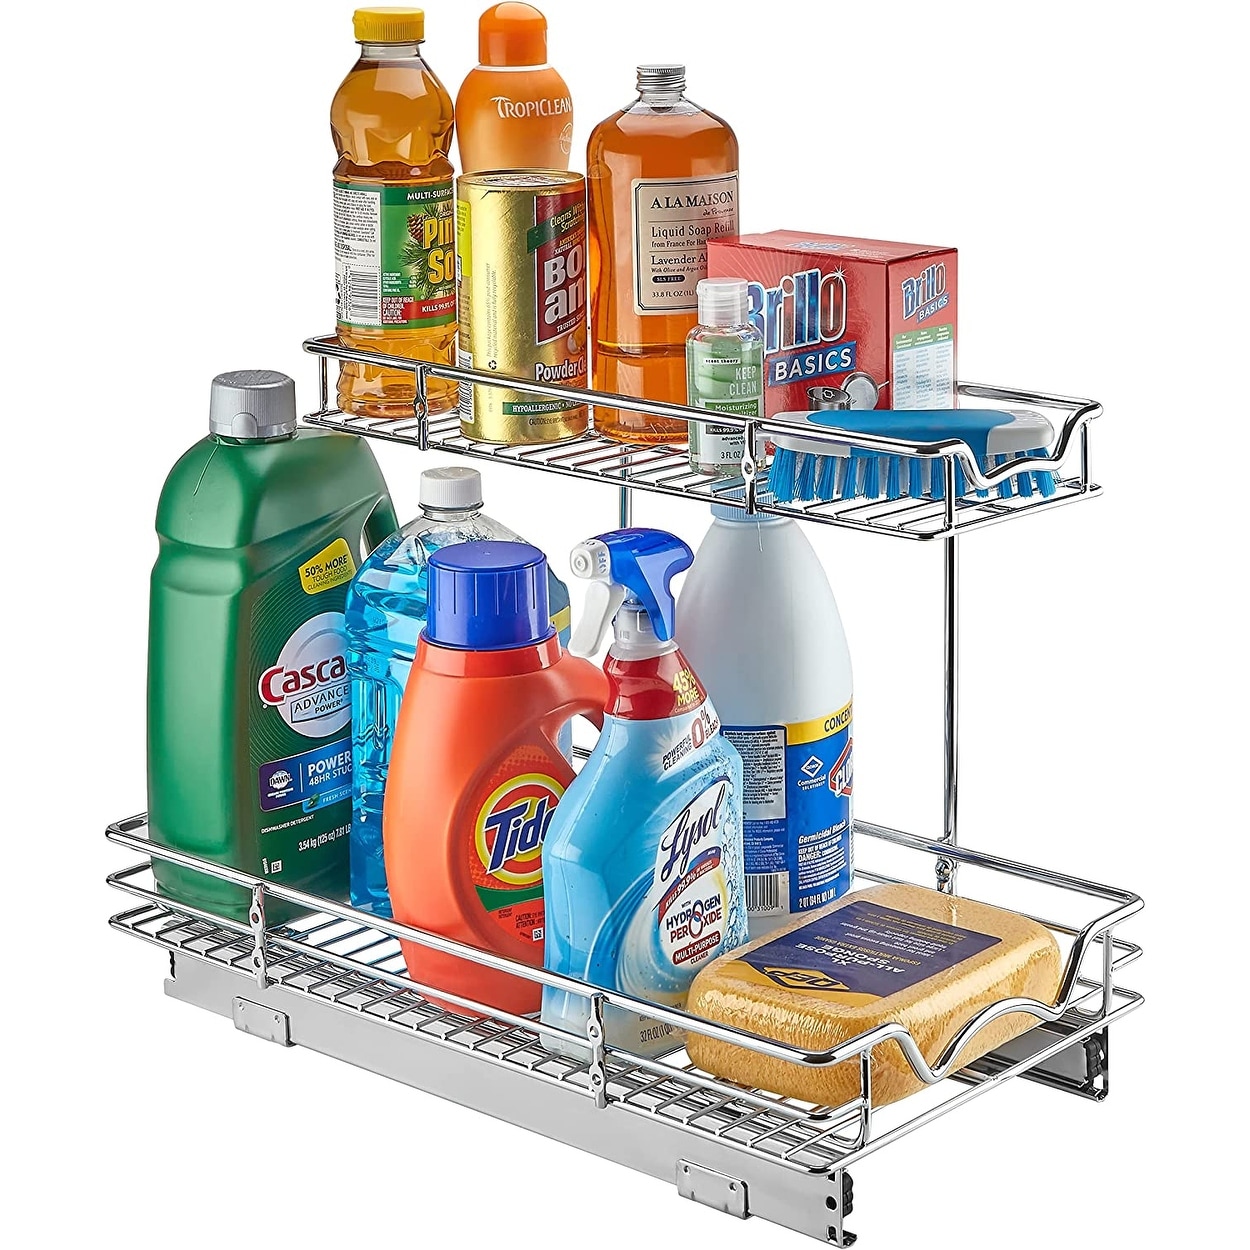 Slide Out Cabinet Organizer - 11W X18D X14-1/2H, Two Tier Roll